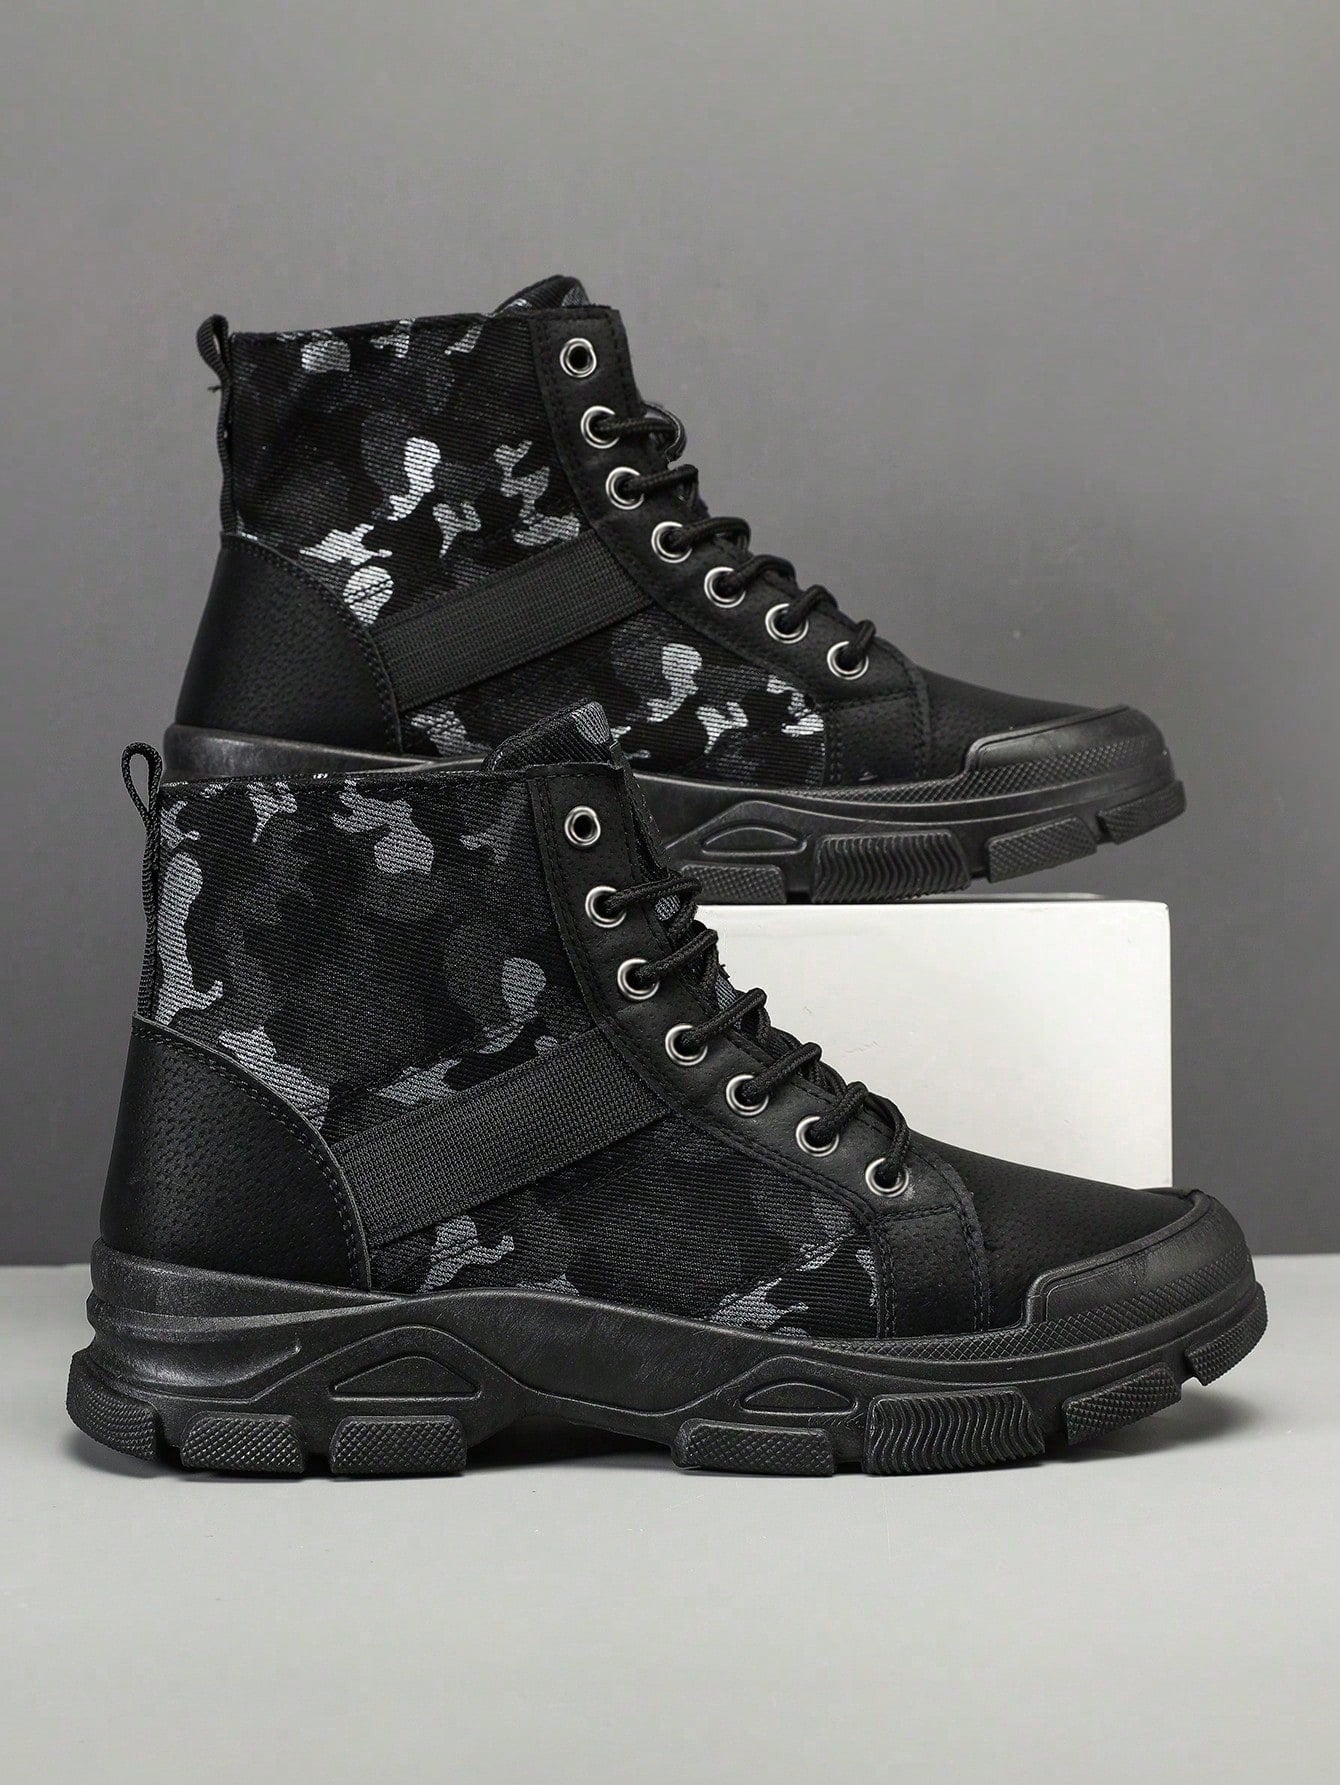 Men's Black Hiking Boots Featuring Letter Collage And Camouflage Pattern, Lace-up Front